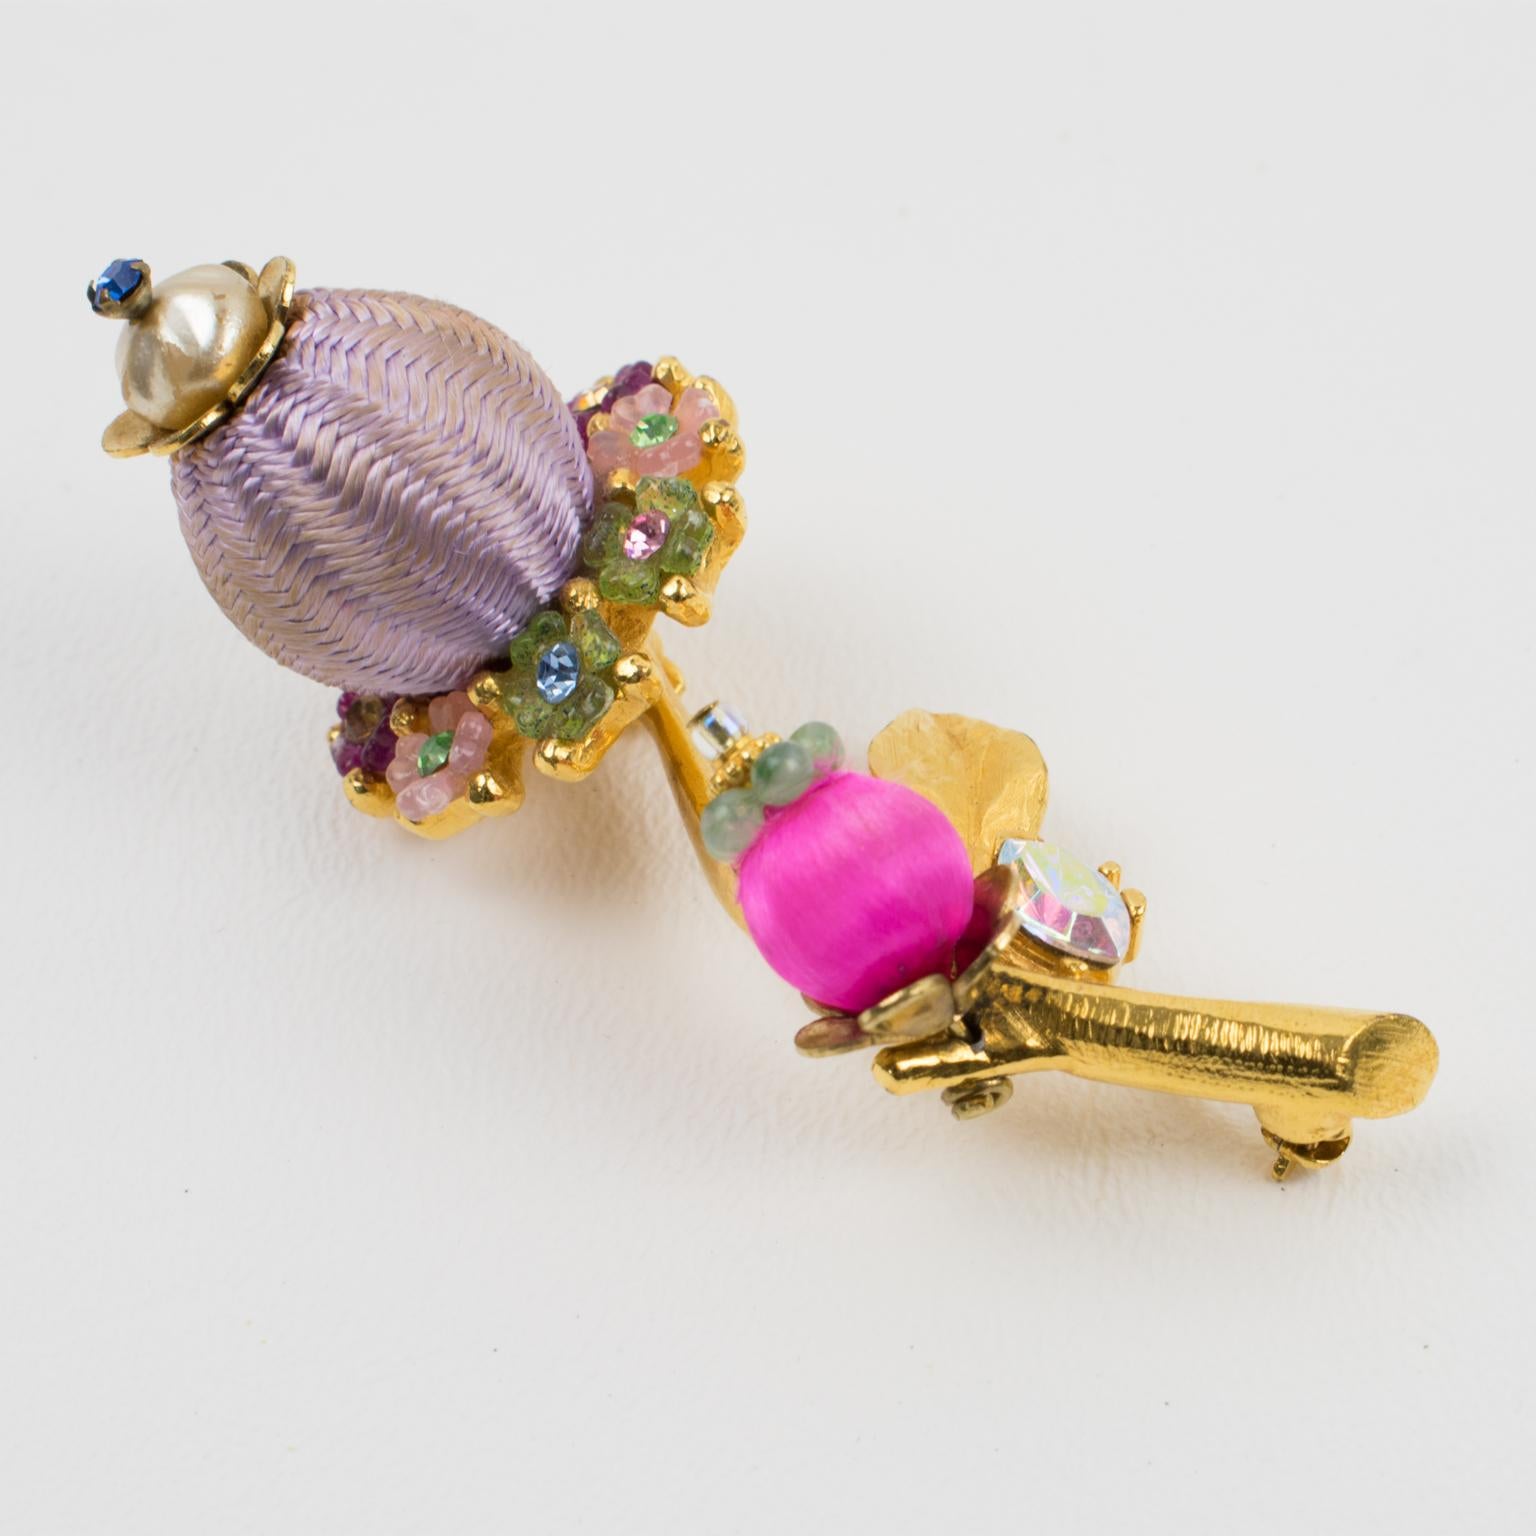 Charming Christian Lacroix Paris signed pin brooch. A jeweled floral shape with gilt metal all textured and ornate with multicolor crystal rhinestones. Stylized flowers are also complemented with lavender and hot pink silk and pearl-like beads.